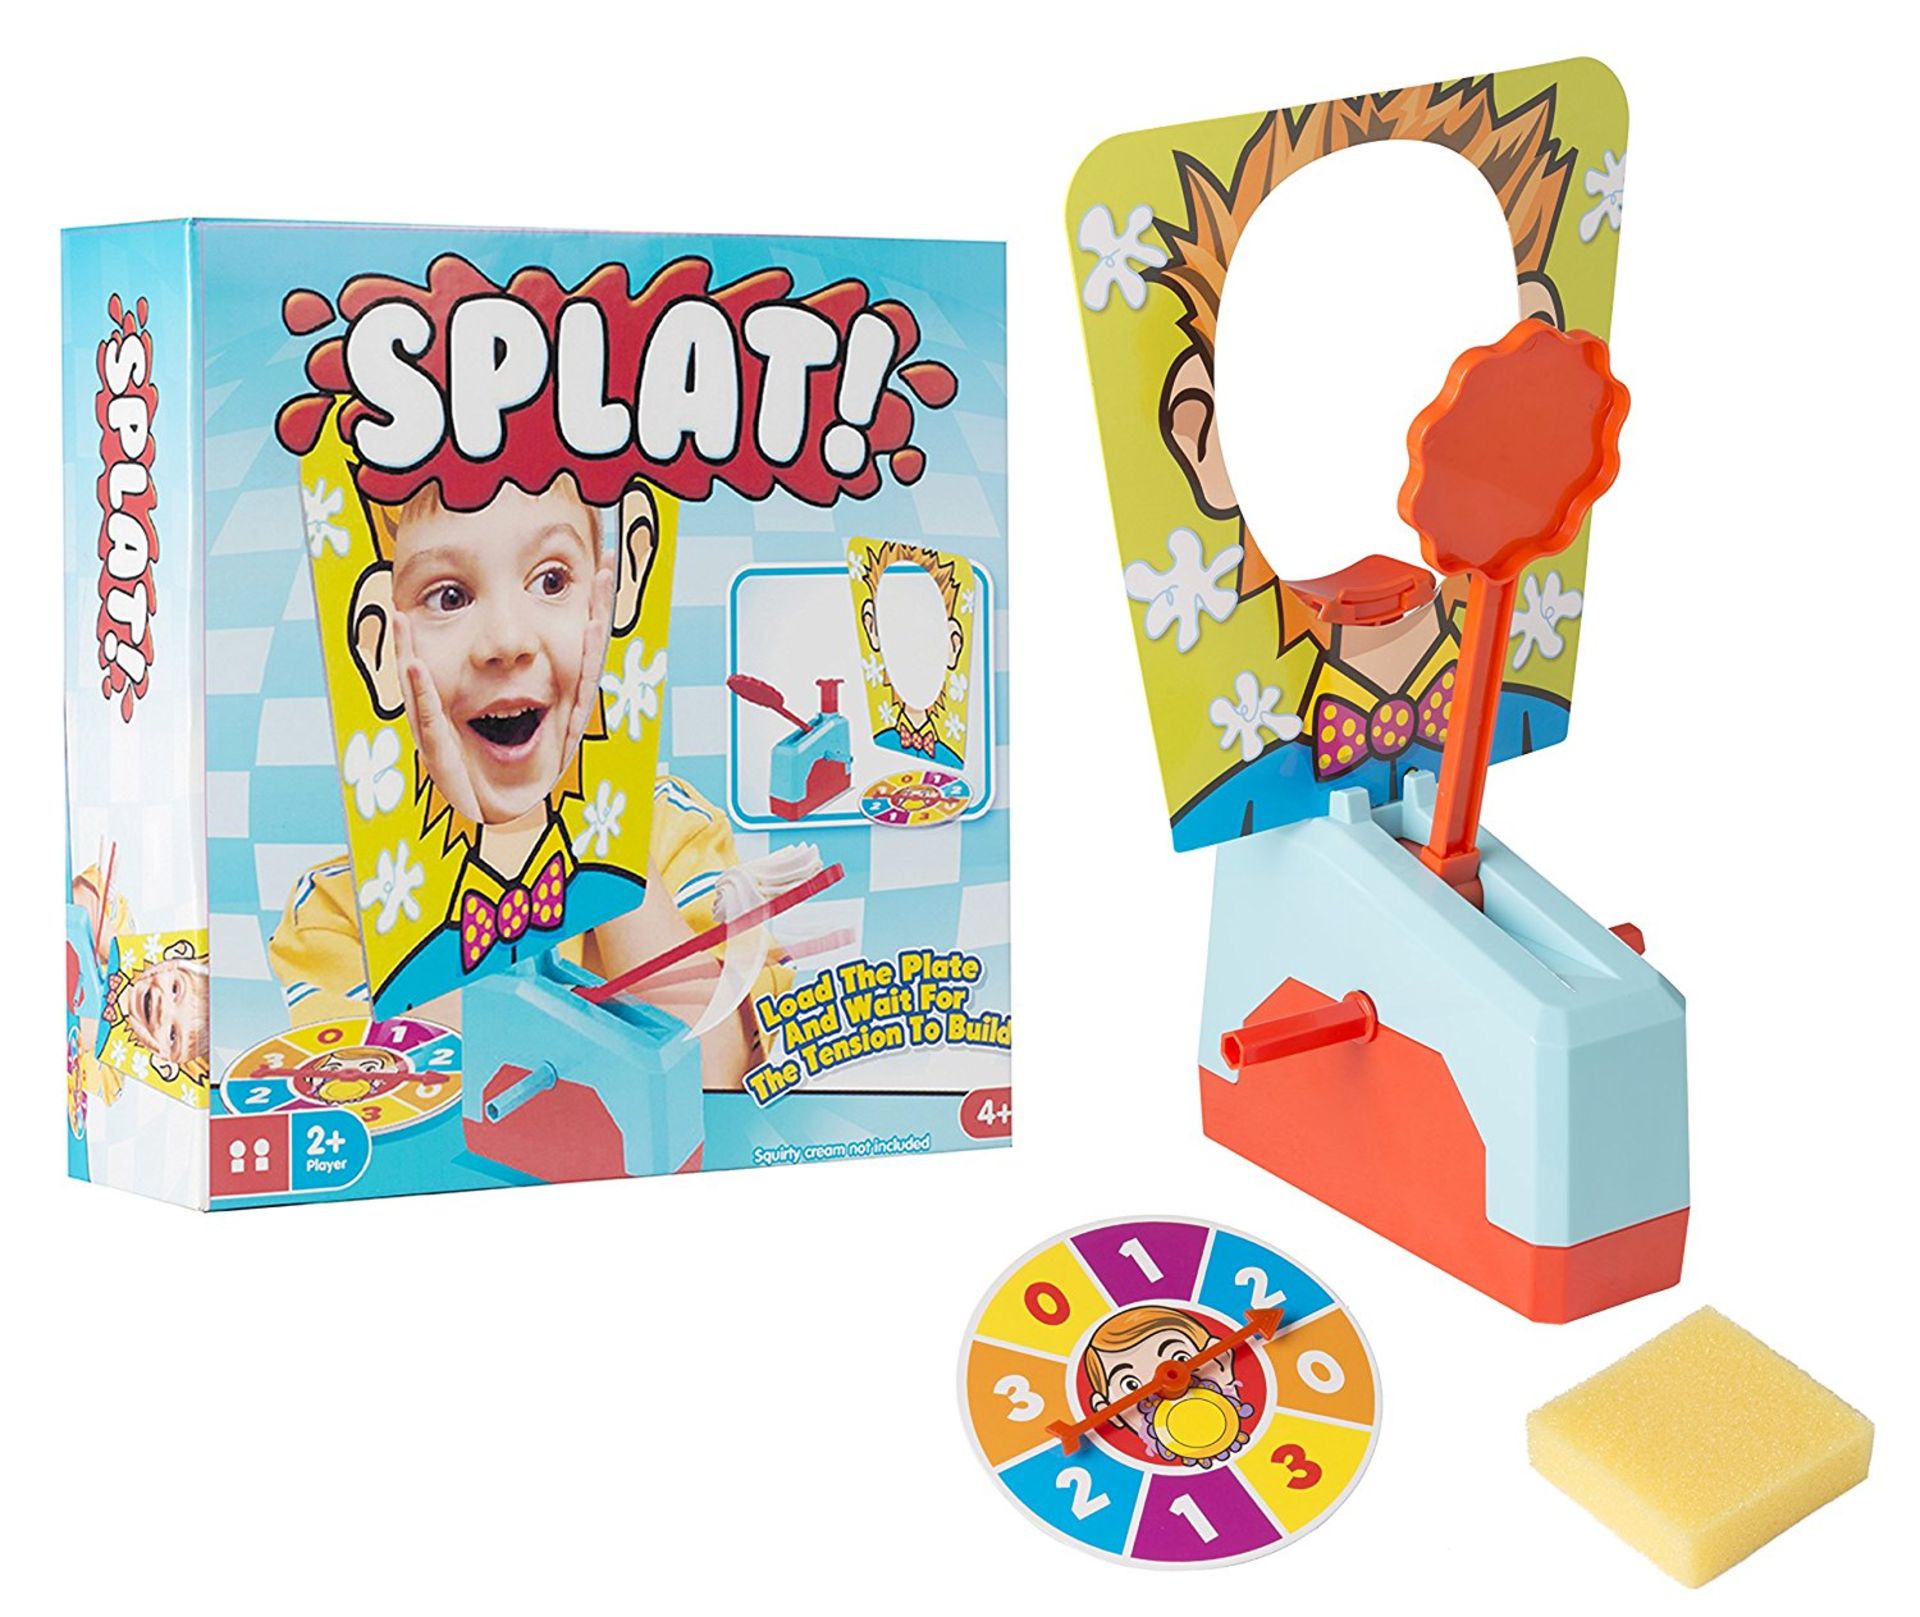 130 x Splat Game - for ages 4 years + RRP £1092